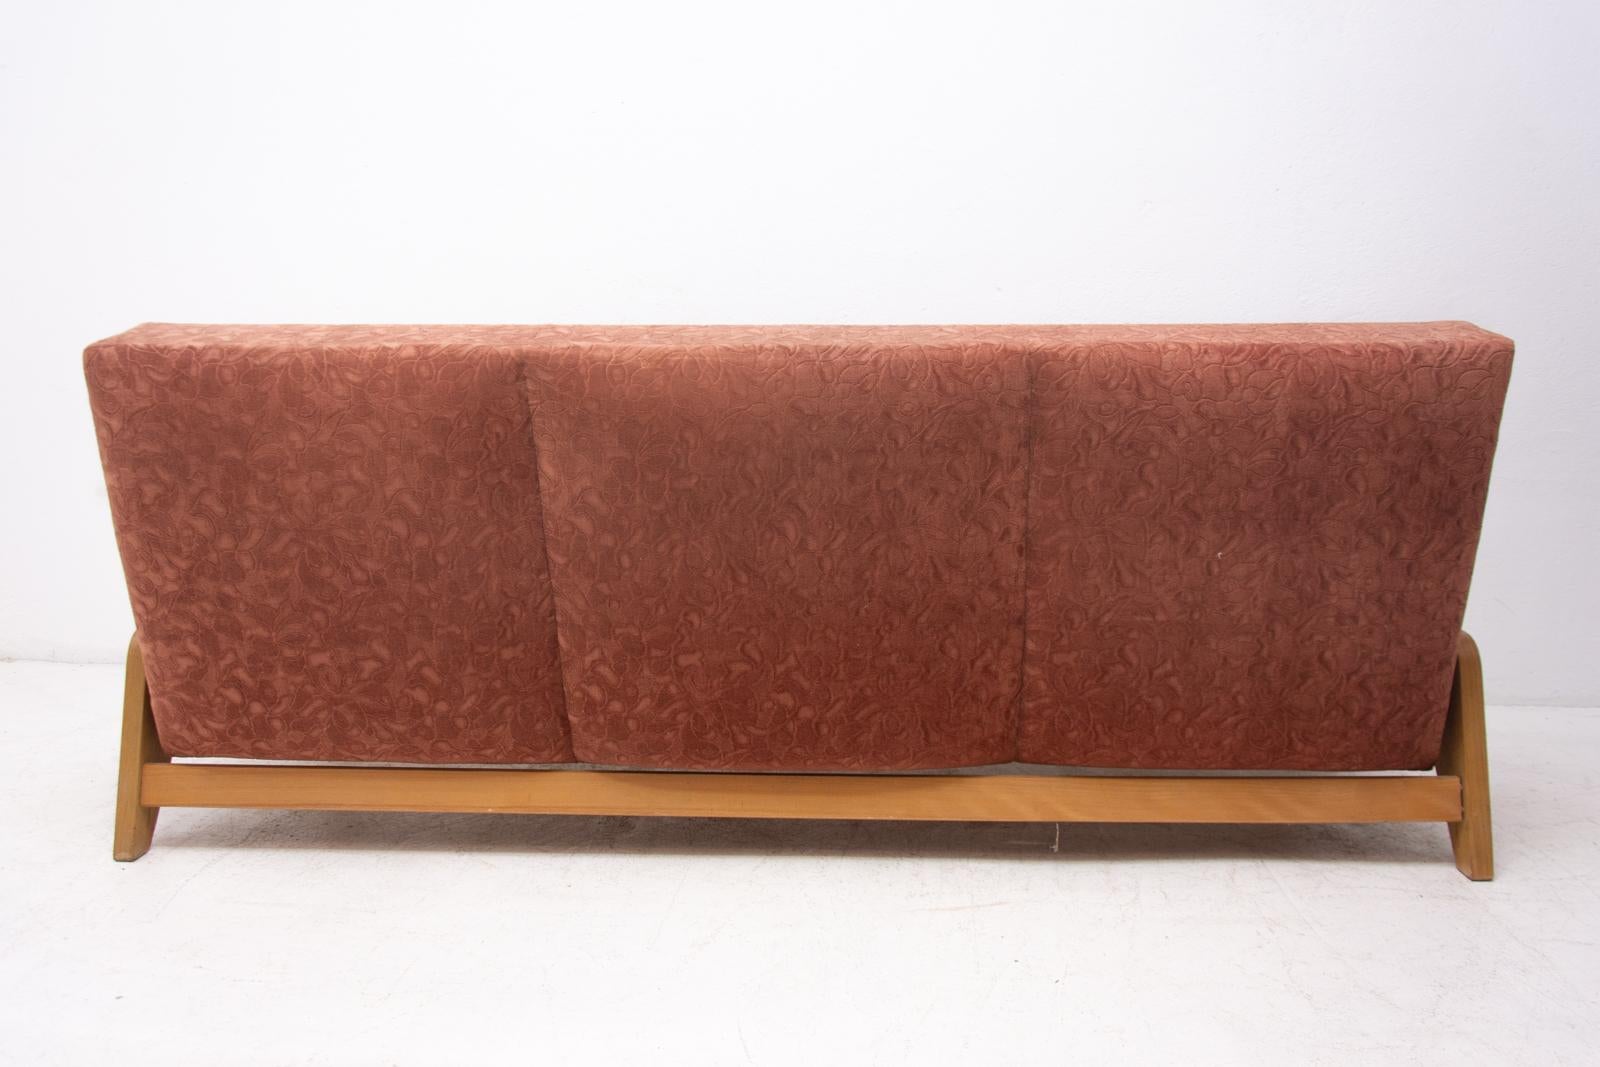 Midcentury folding sofa-bench made in the former Czechoslovakia in the 1960s. It features very attractive and simple design.

Material: Fabric, beechwood. The wooden structure and upholstery are in very good Vintage condition.

Unfolded: 120 x